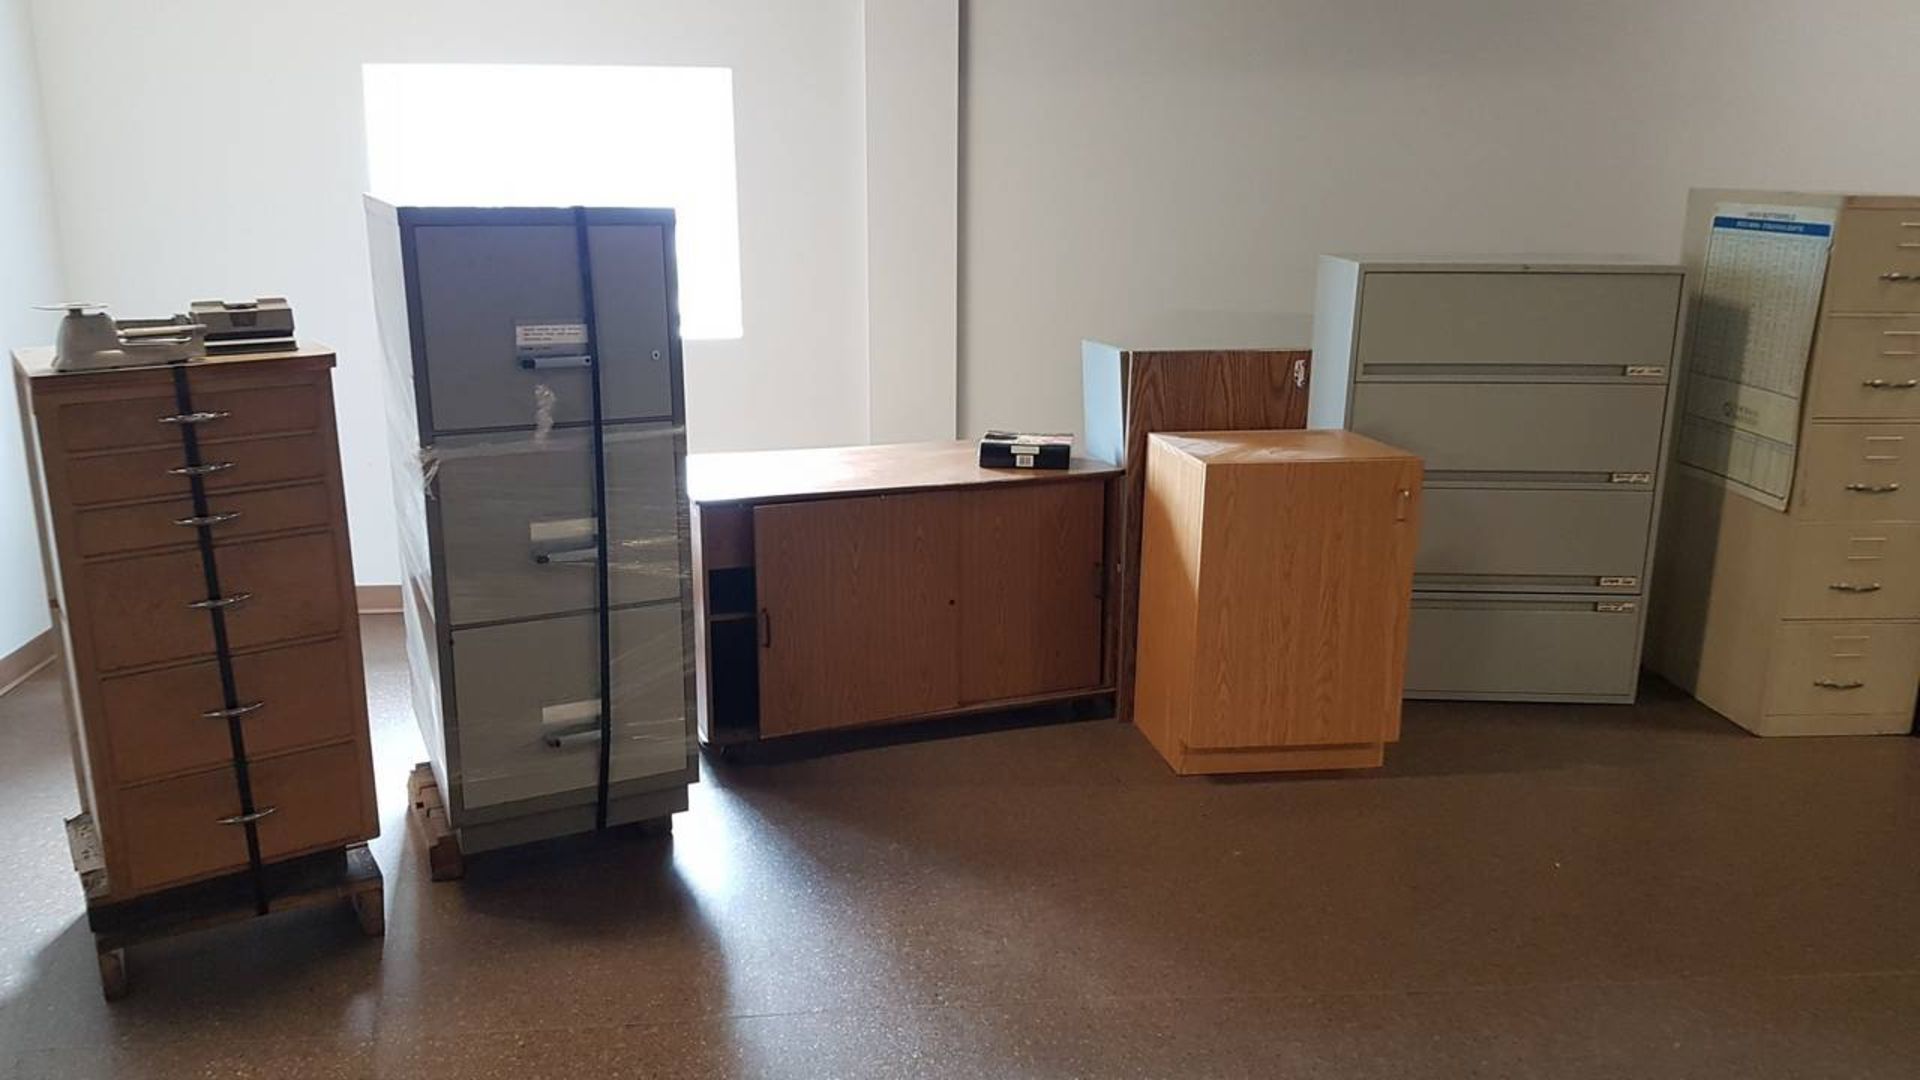 Filing cabinets and desk